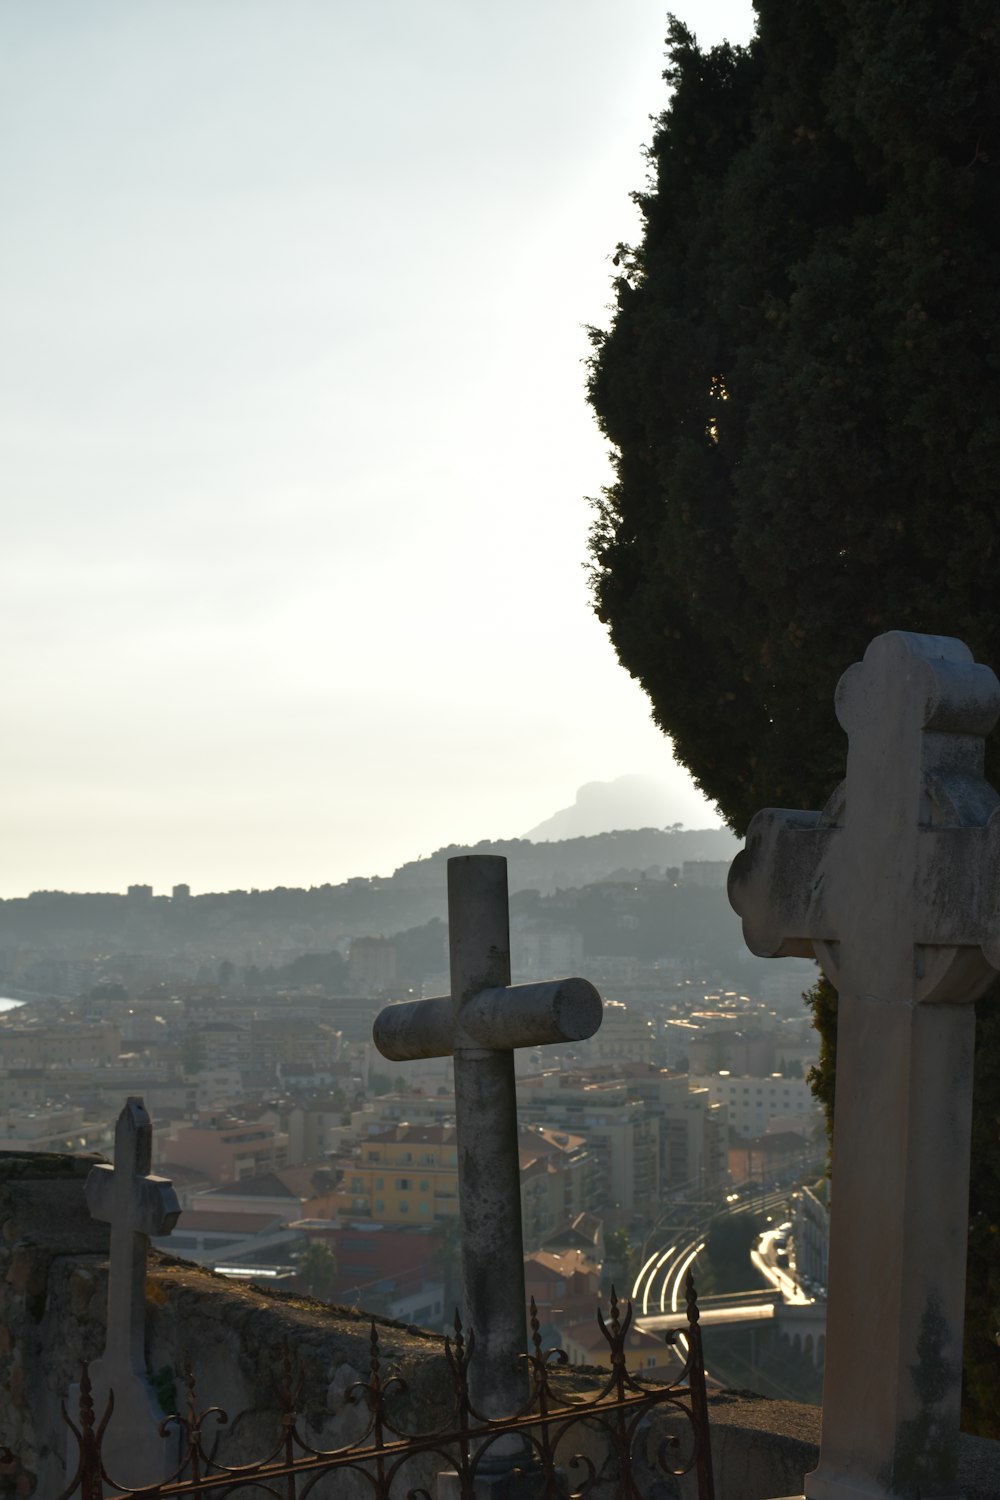 a view of a cemetery with a cross in the foreground